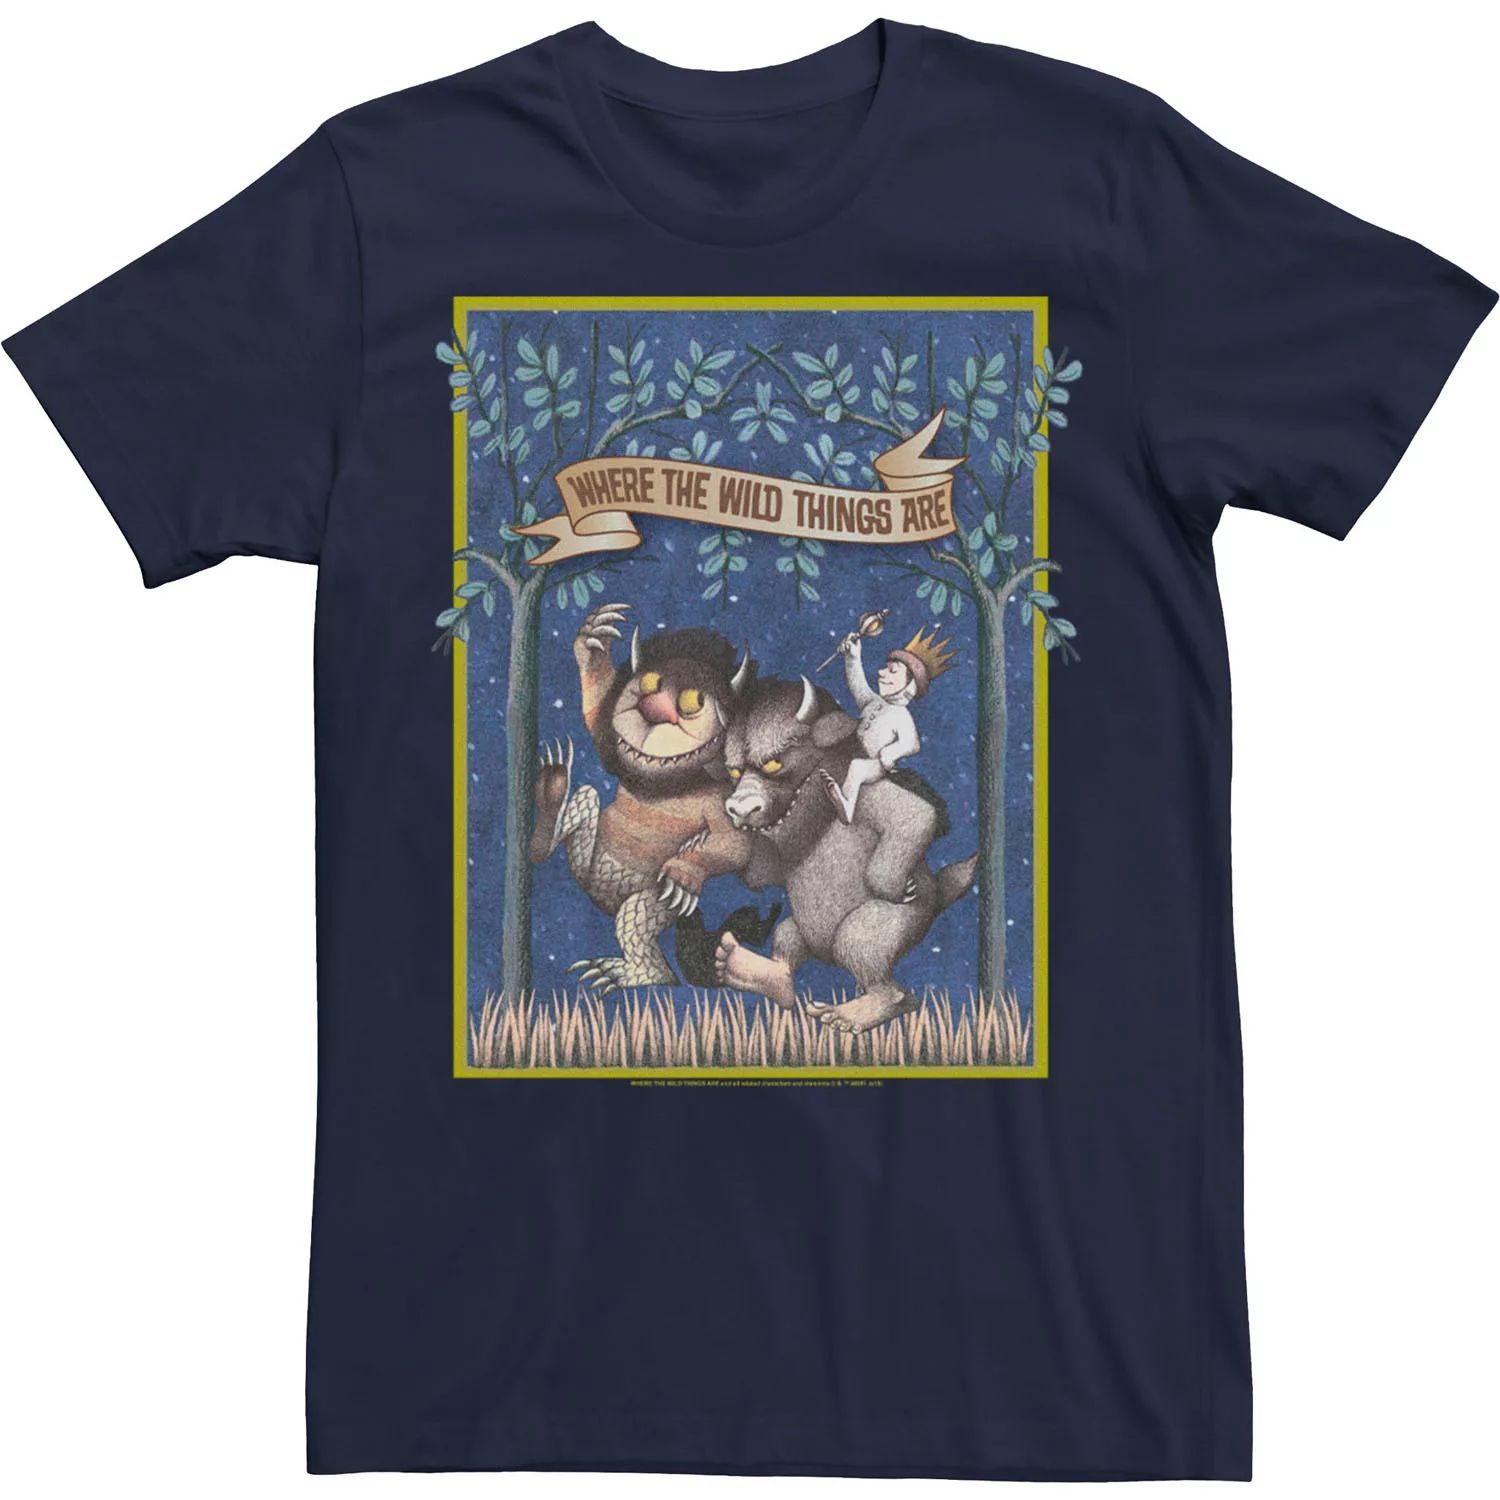 Мужская футболка с плакатом «Where The Wild Things Are Wild Thins» Licensed Character vai steve where the wild things are 2dvd